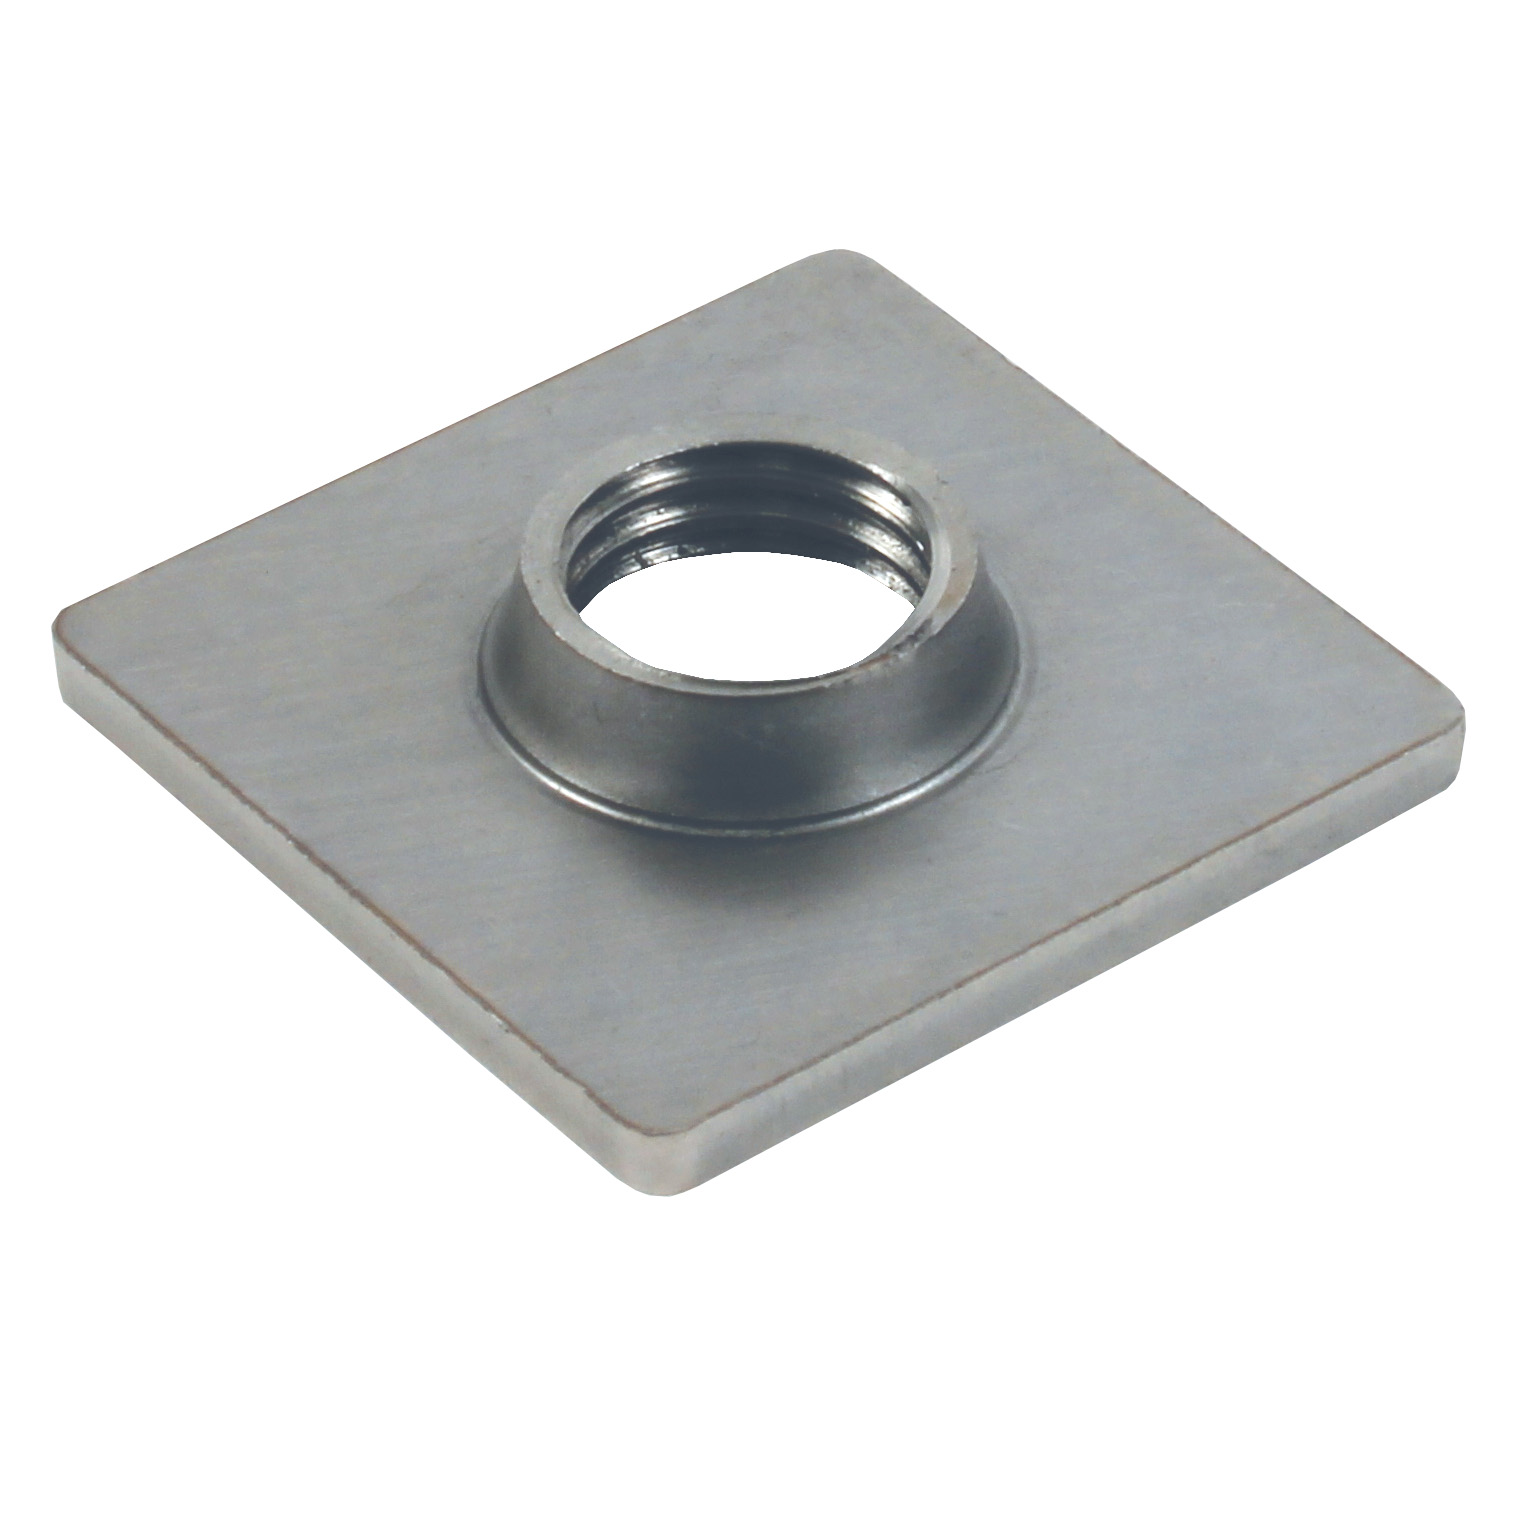 Cap for square tube to be welded - To be welded - Square or rectangular - Stainless steel